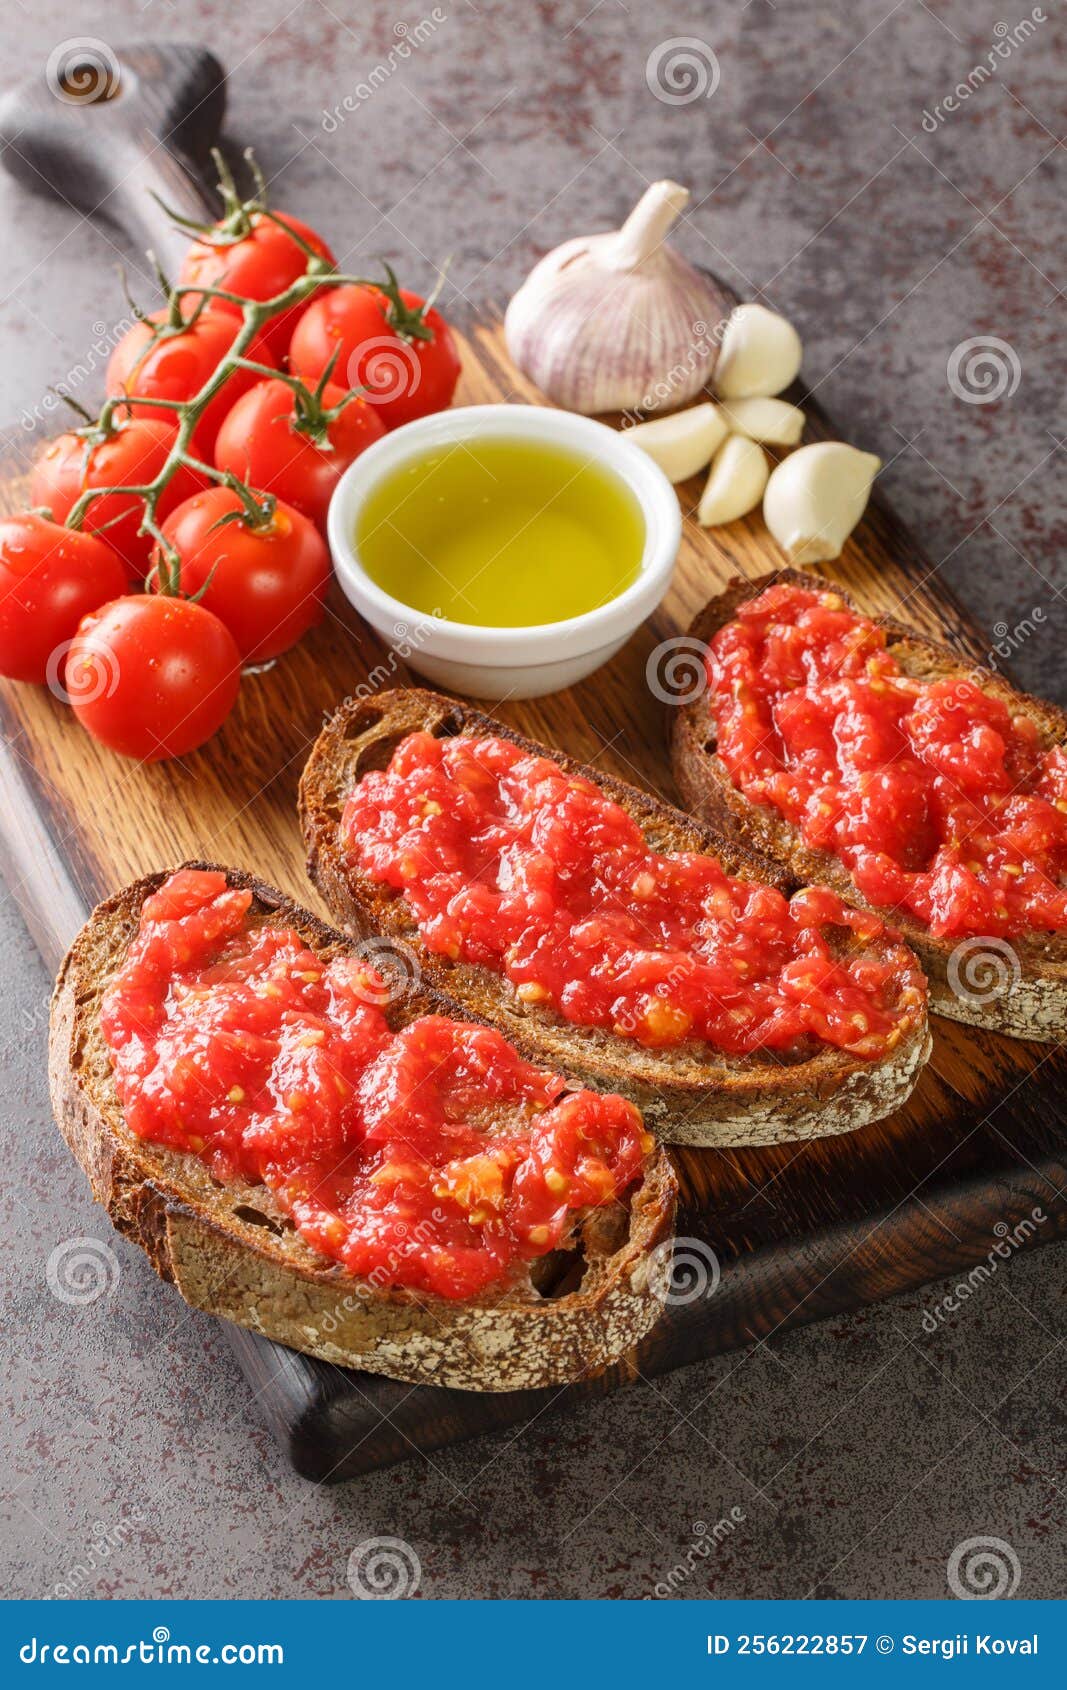 spanish style toast with tomato pan con tomate closeup on the wooden board. vertical